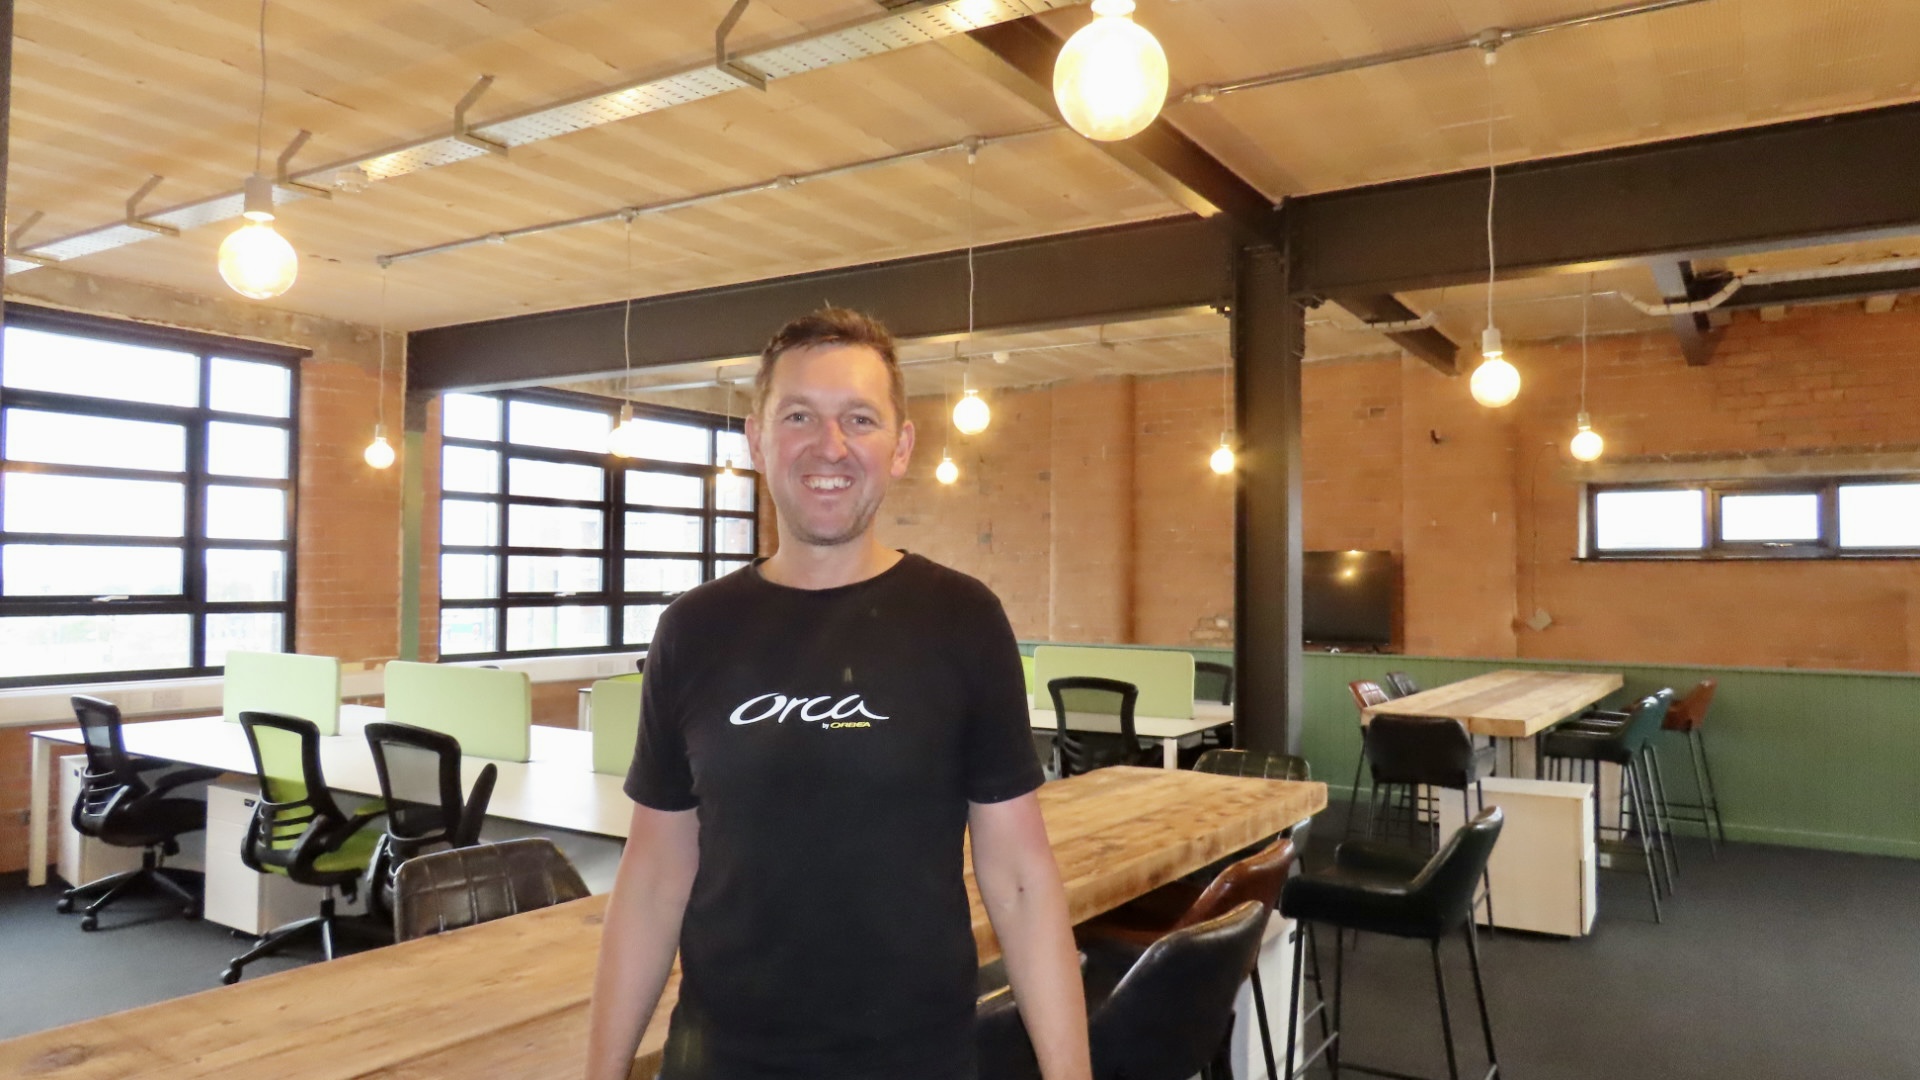 Work is continuing to create the new Werksy co-working space in Southport. Werksy co-owner Rick Blaney 